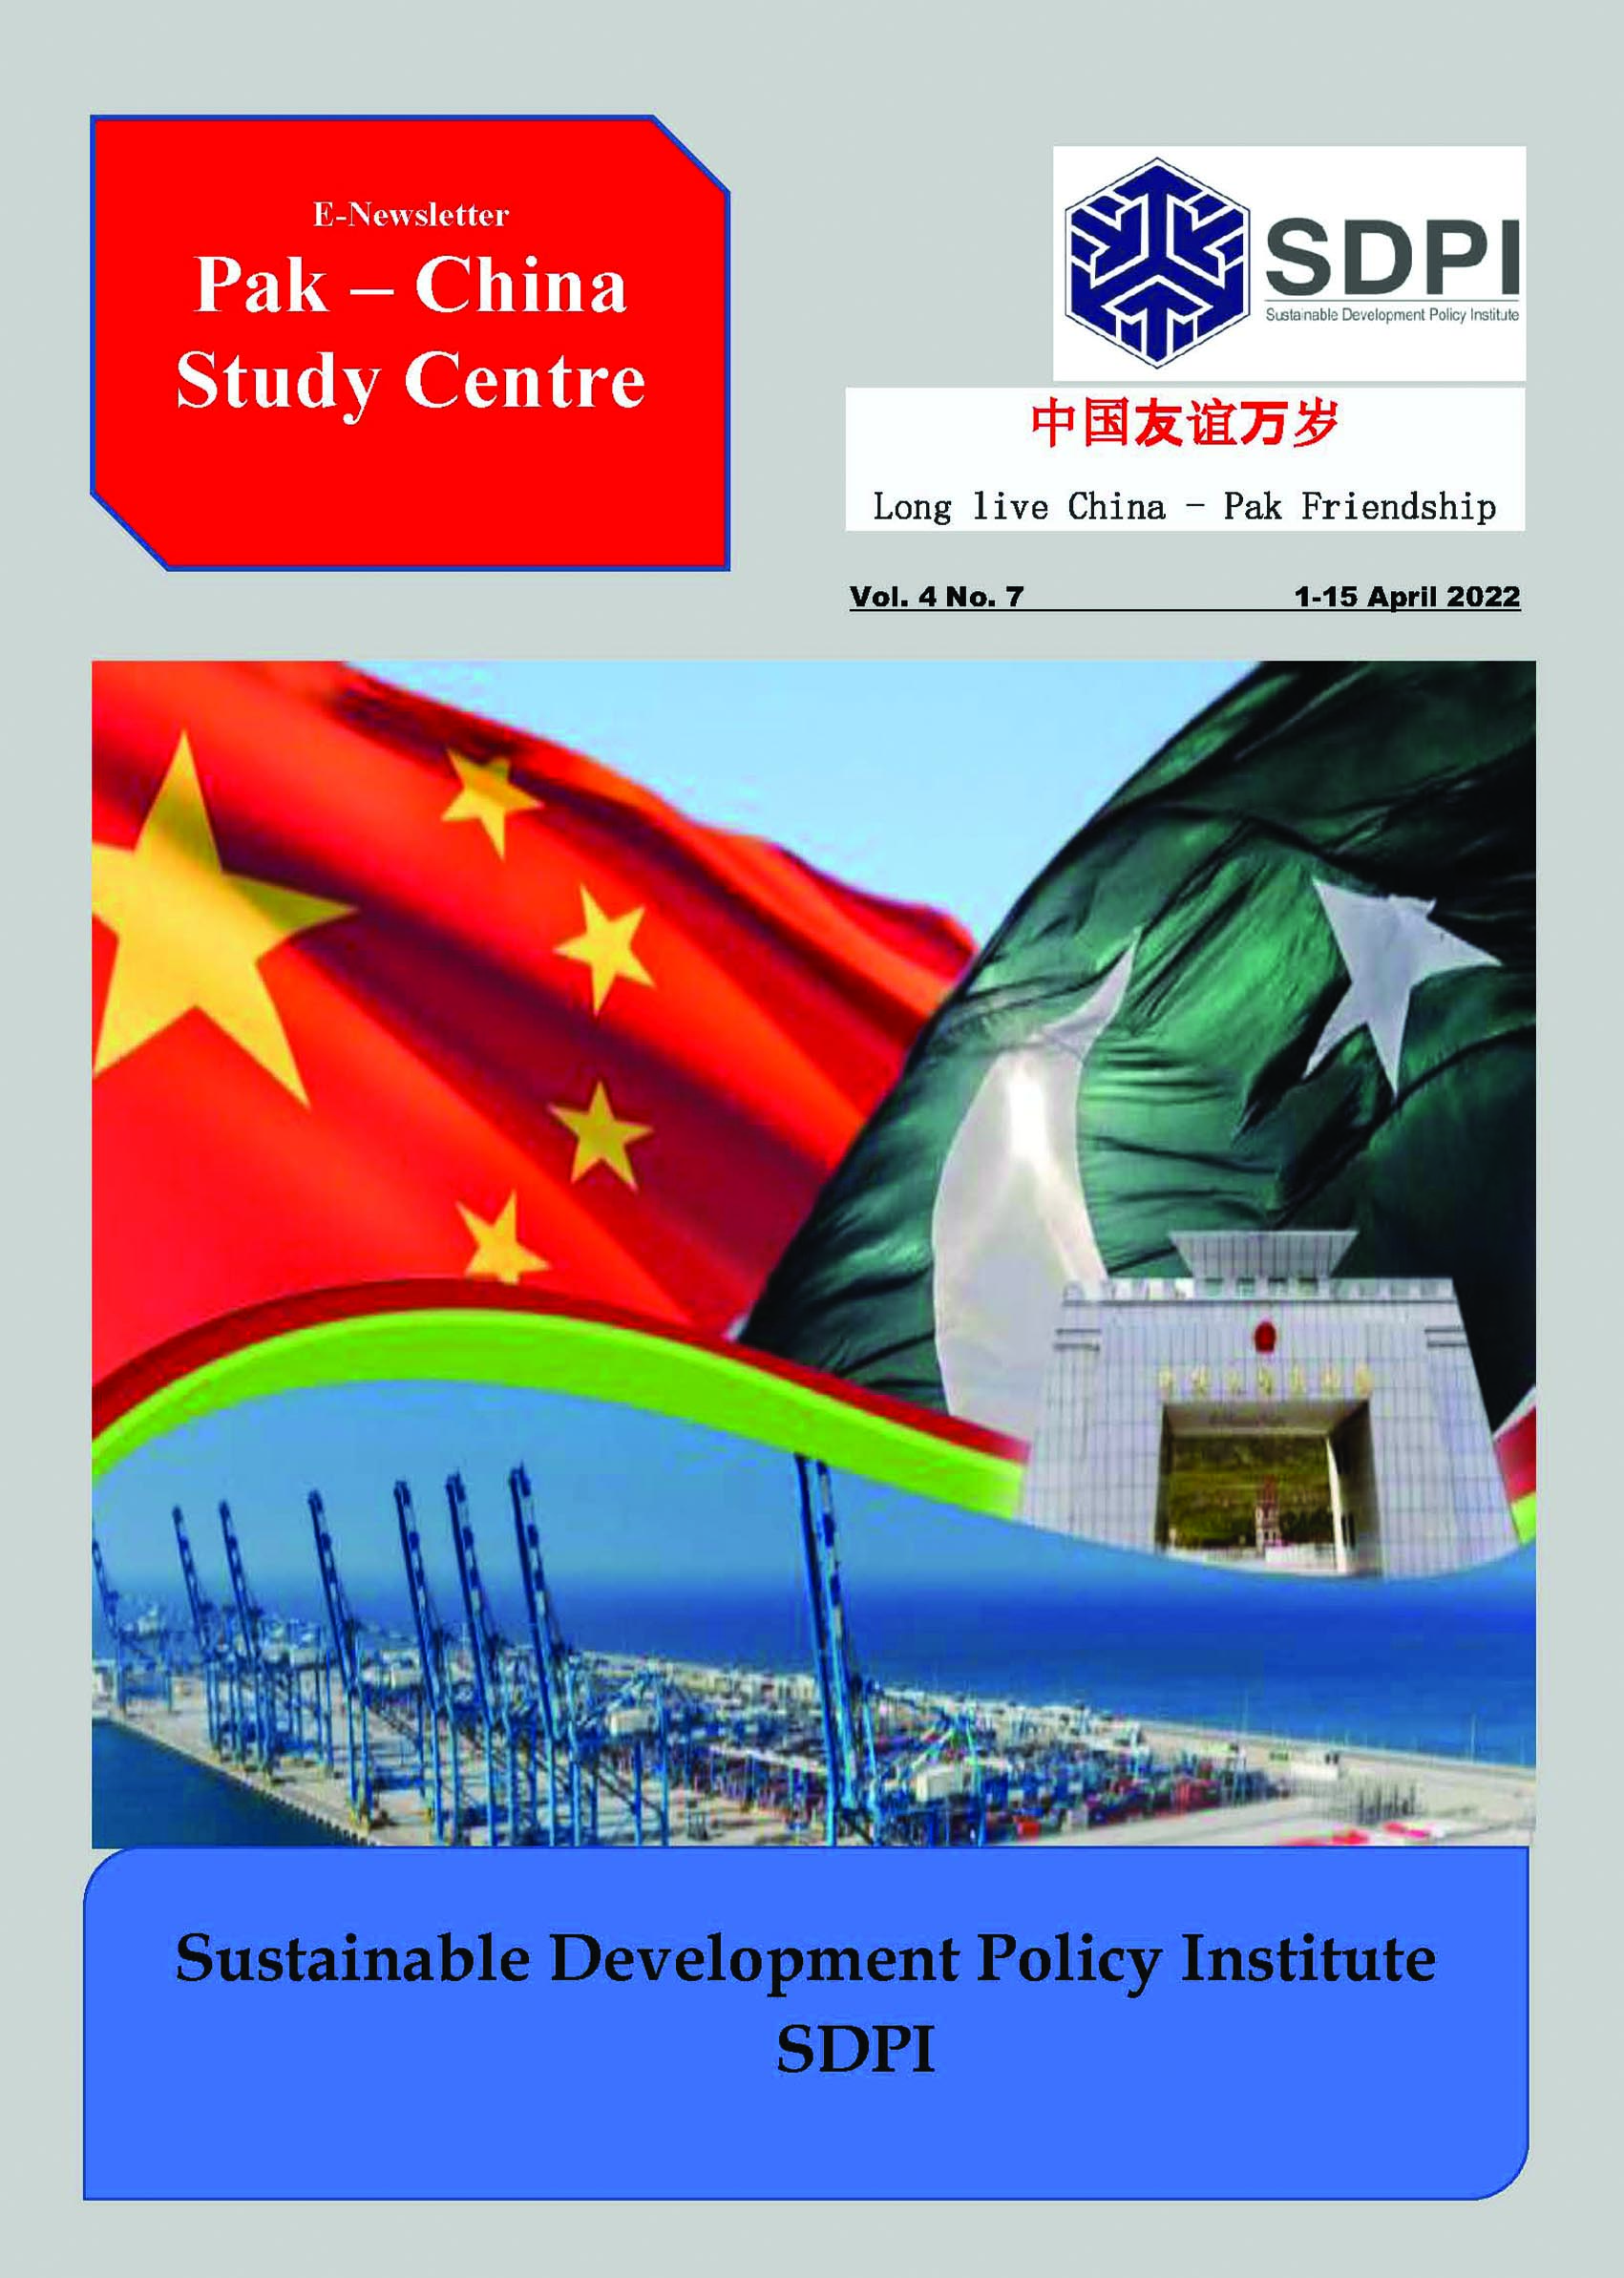 E-Newsletter for China Study Centre Vol. 4, No. 7, Issue 1-15 April 2022